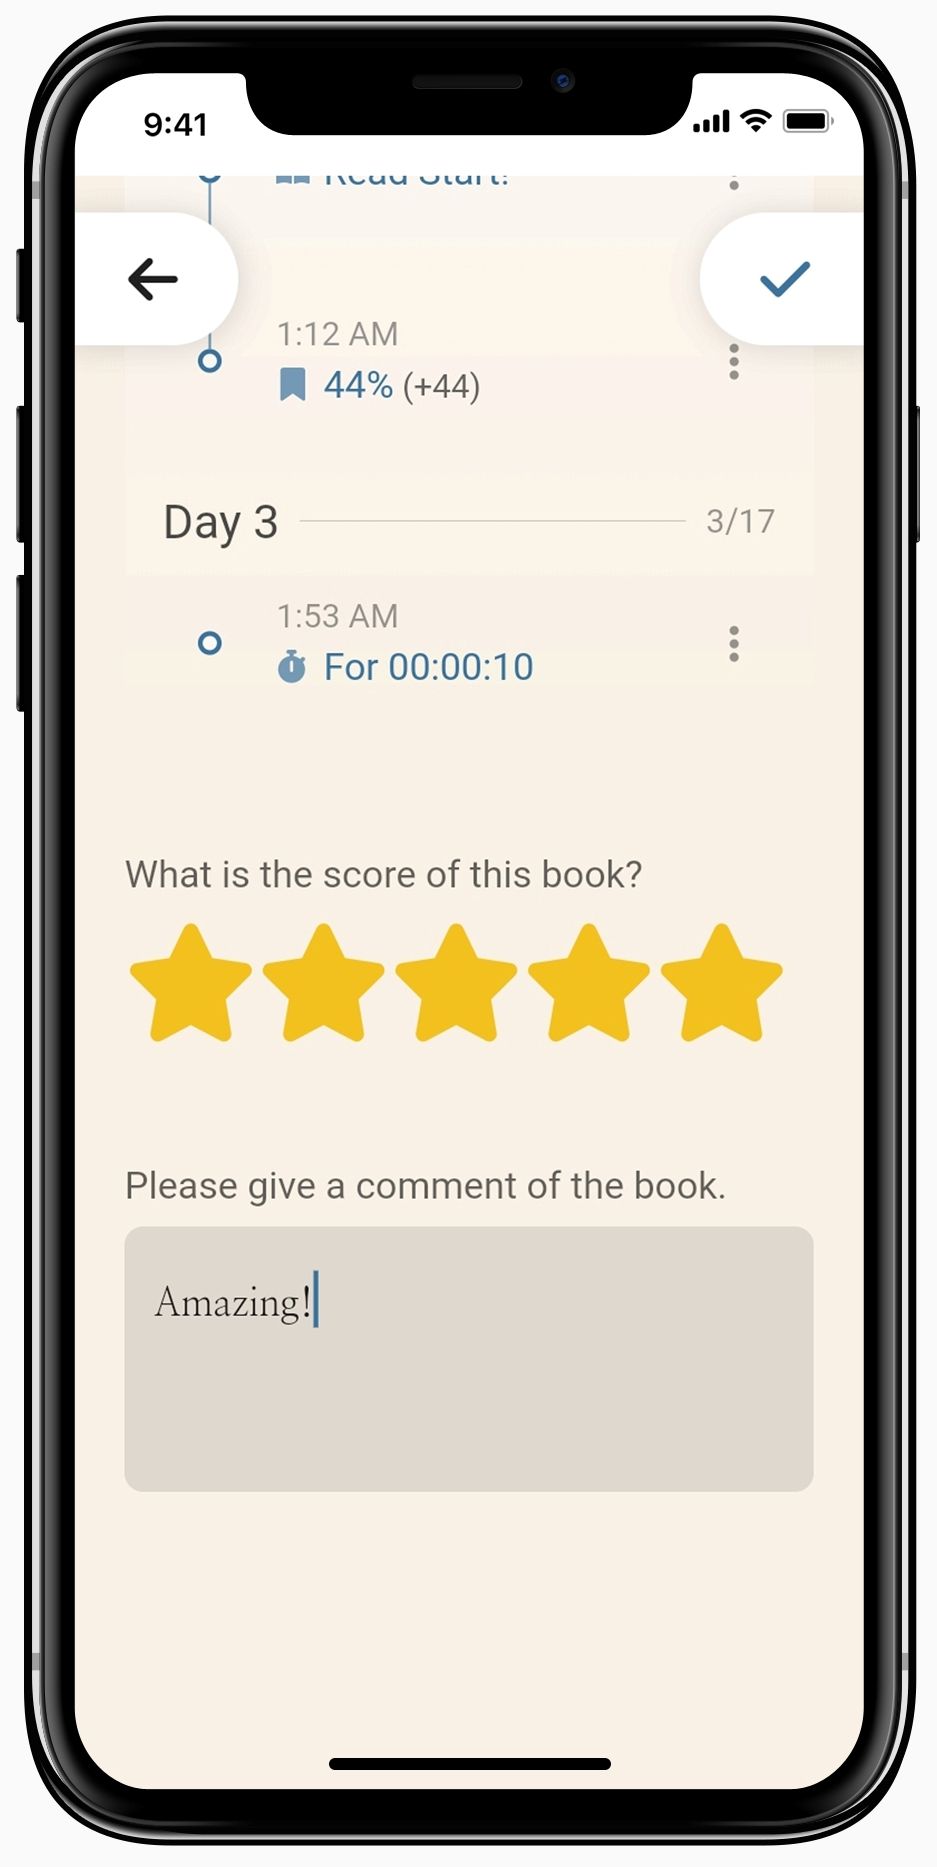 Bookmory Add Review page. It shows the times read by day, your score of the book out of five stars, and a comment about the book.